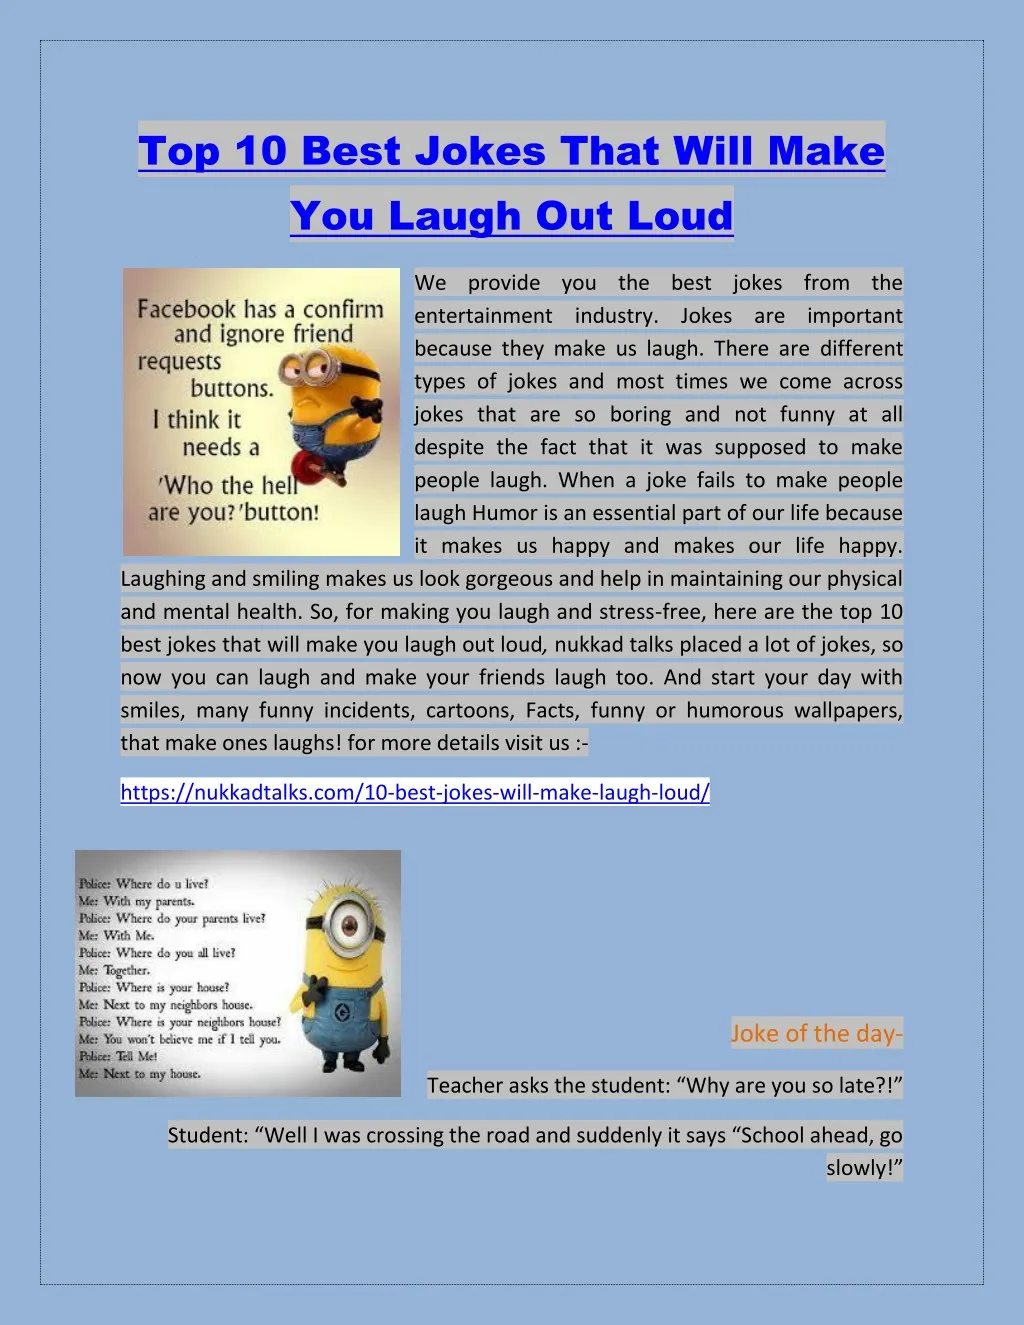 PPT Top 10 Best Jokes That Will Make You Laugh Out Loud PowerPoint